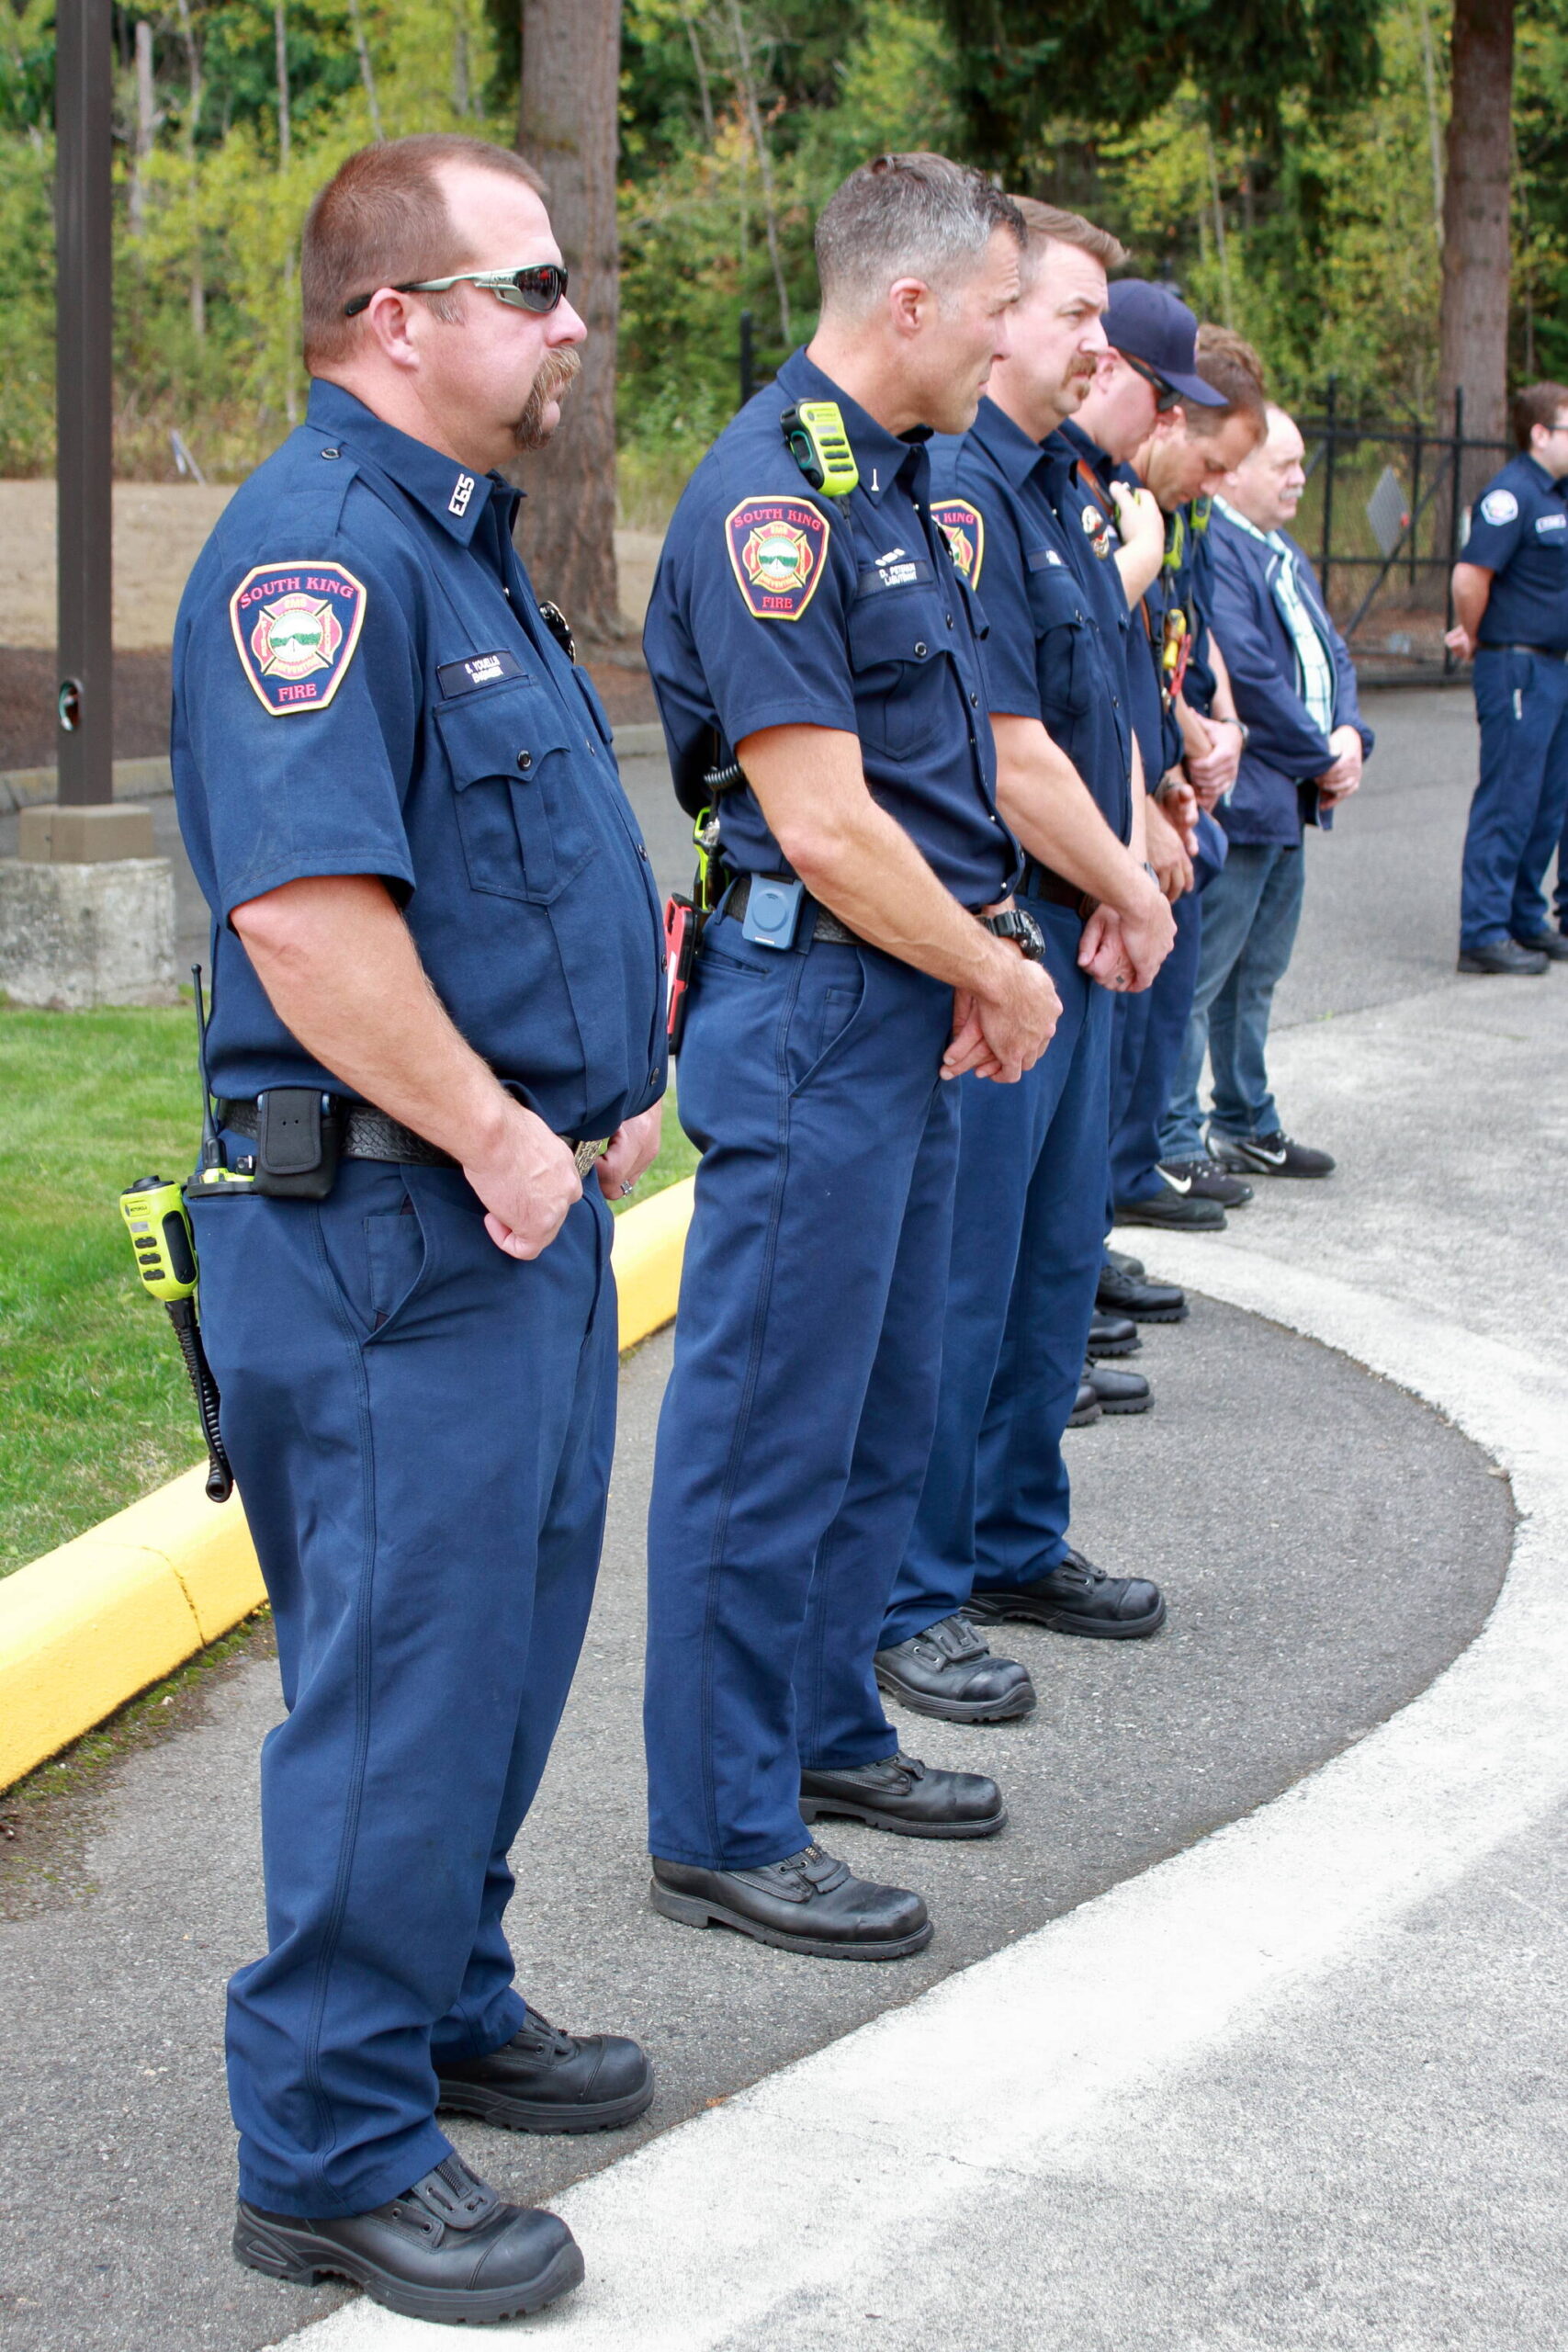 First responders attending the memorial event on Sept. 11. Photo by Keelin Everly-Lang / The Mirror